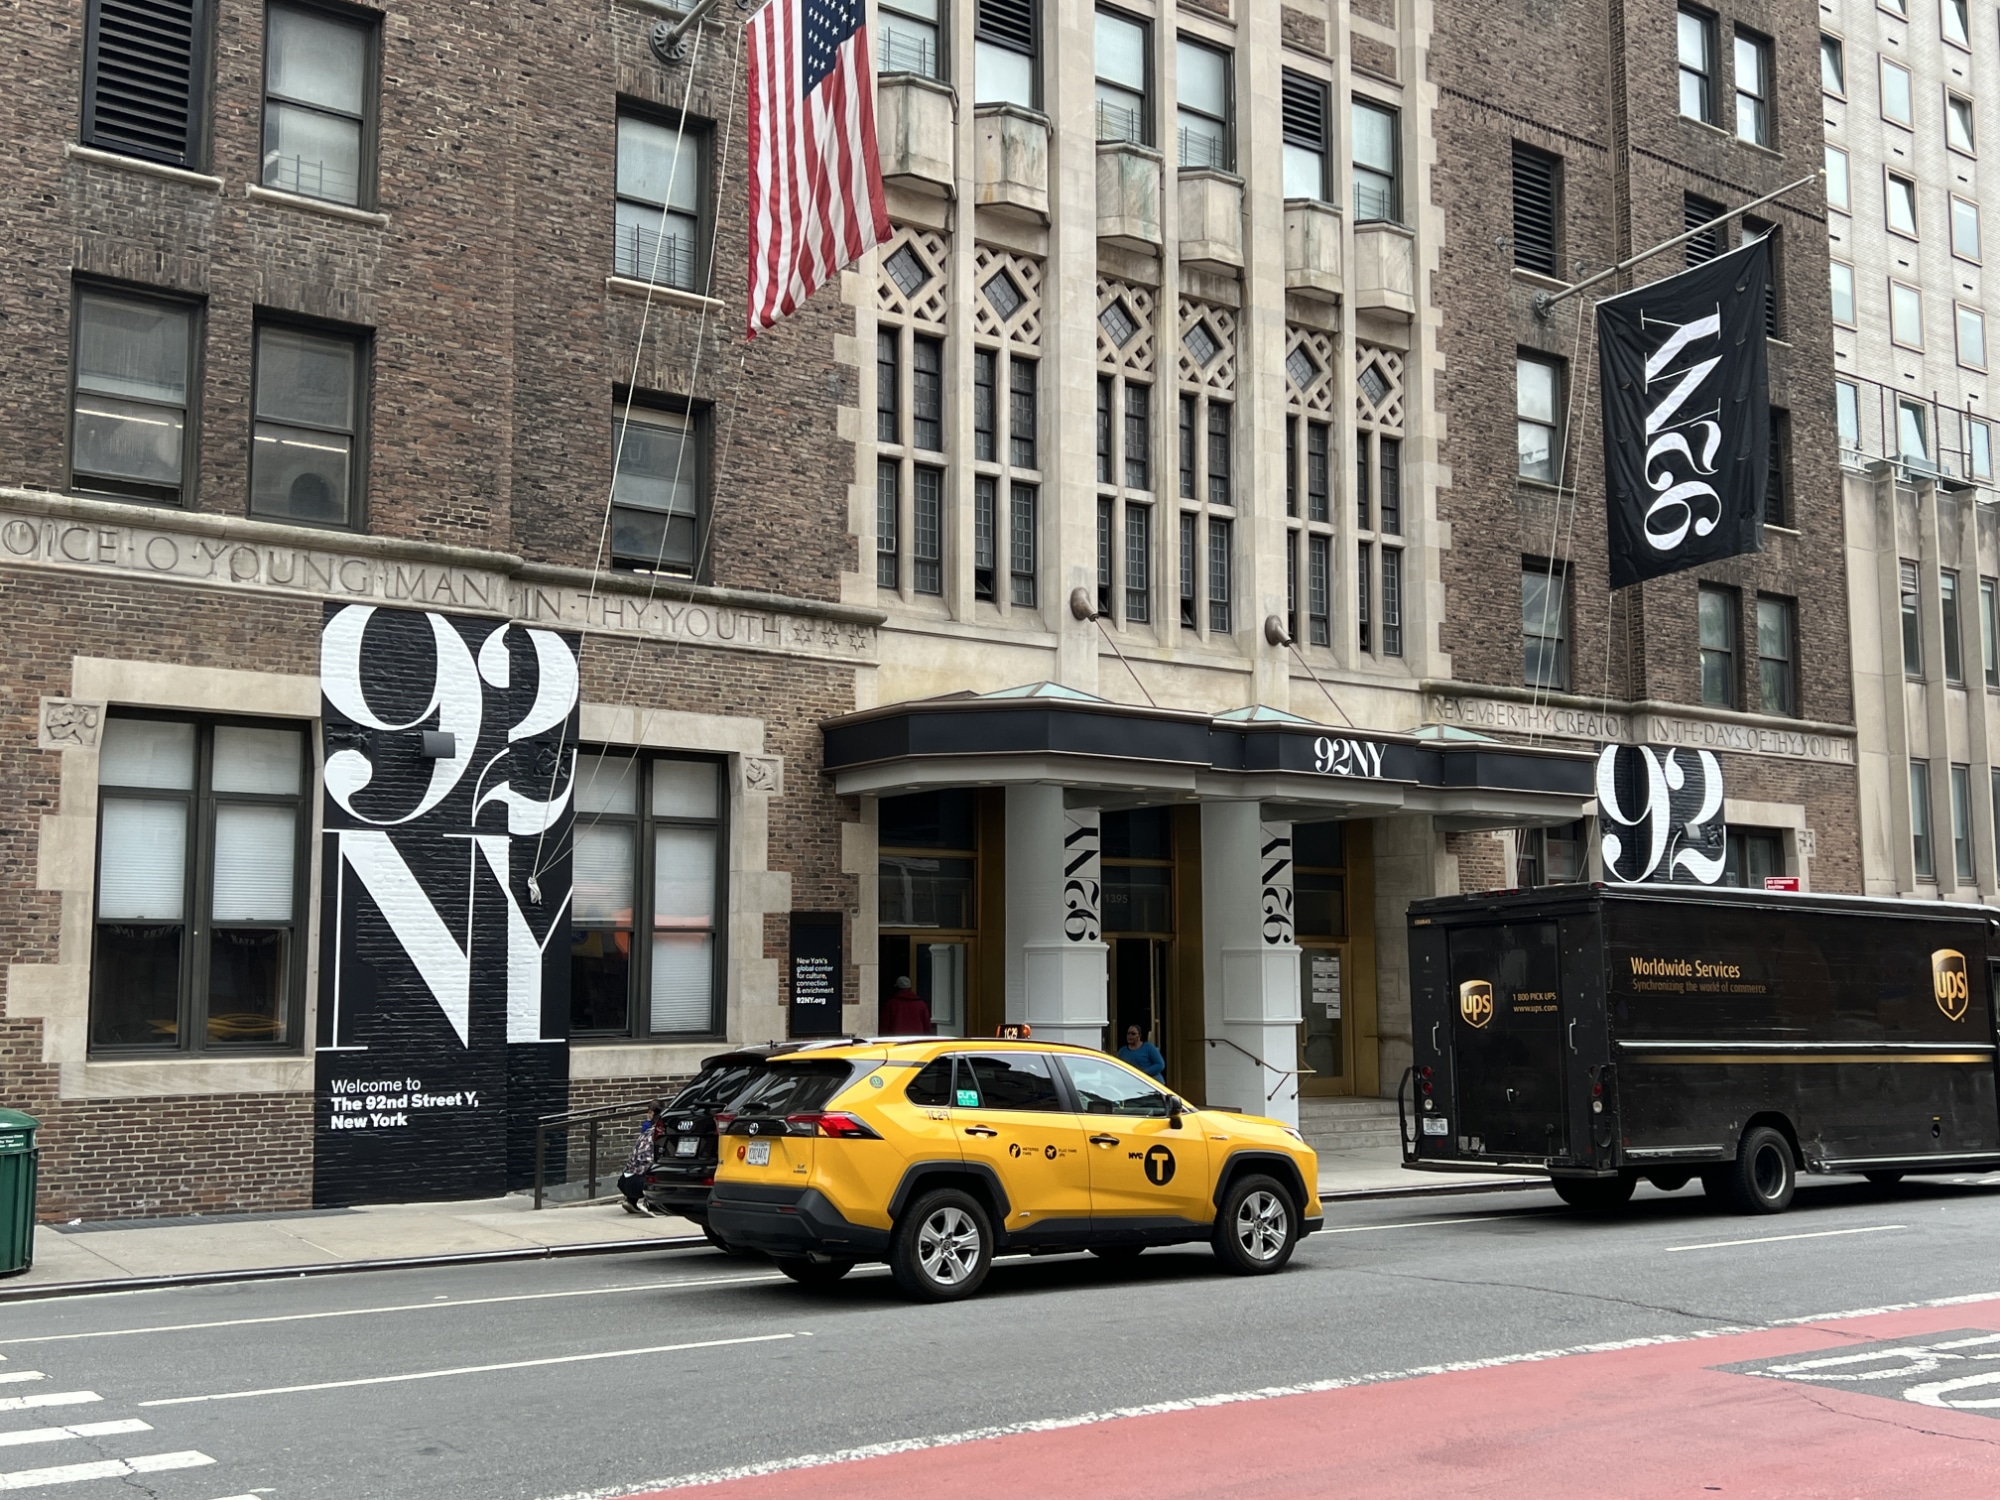 The 92nd Street Y gets new name and new look/Upper East Site